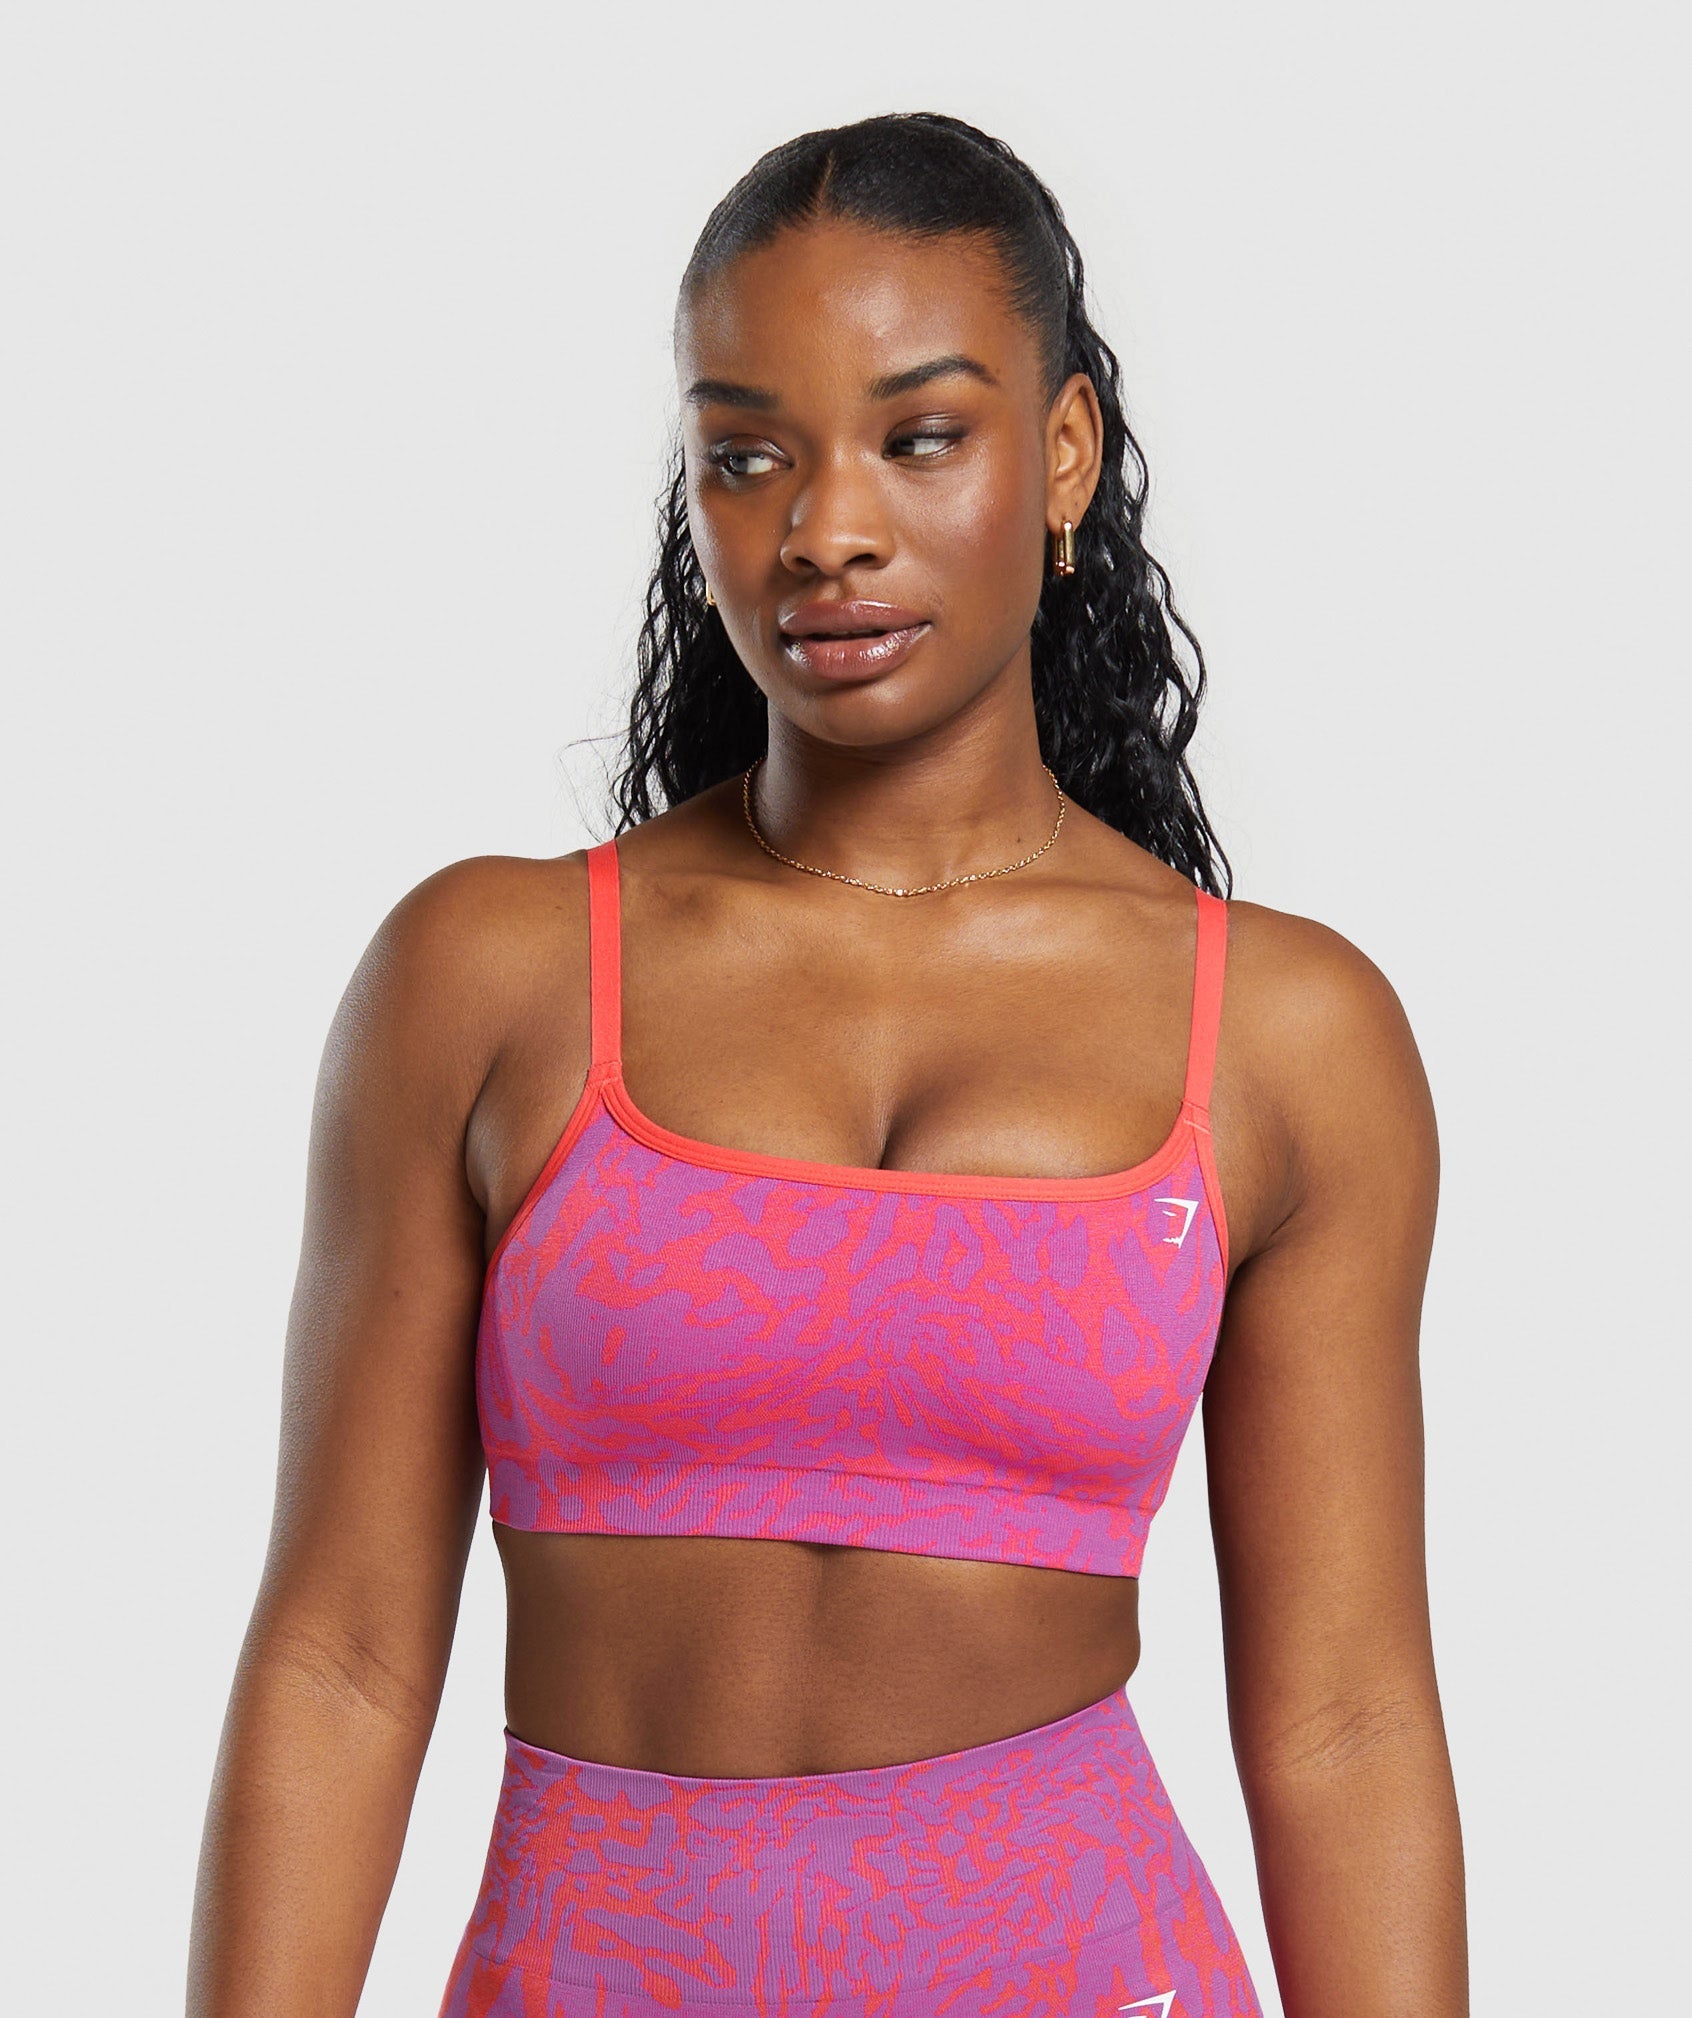 Adapt Safari Seamless Sports Bra in Shelly Pink/Fly Coral - view 1